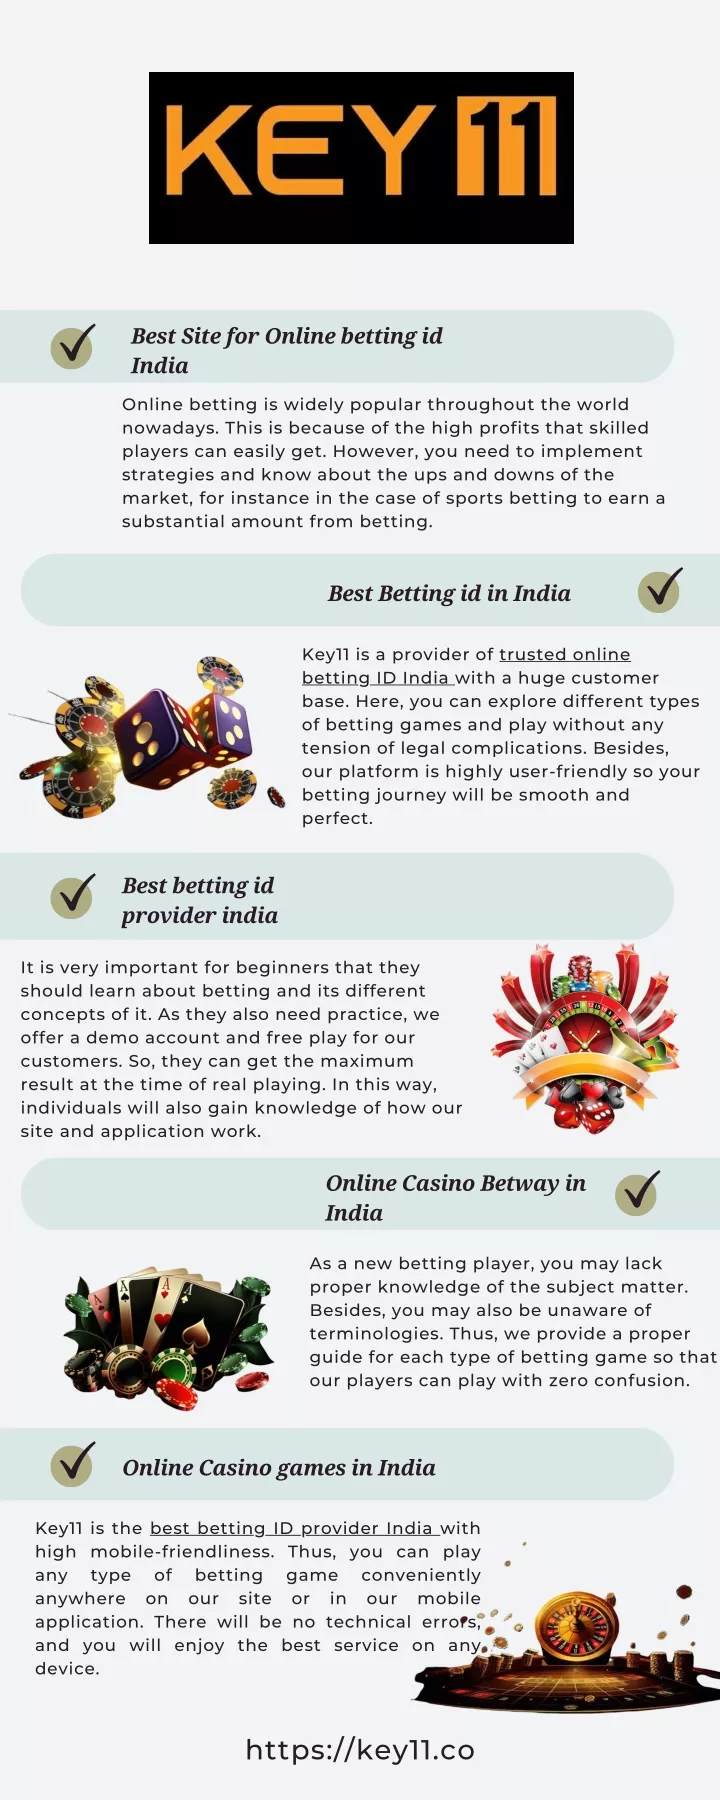 best site for online betting id india